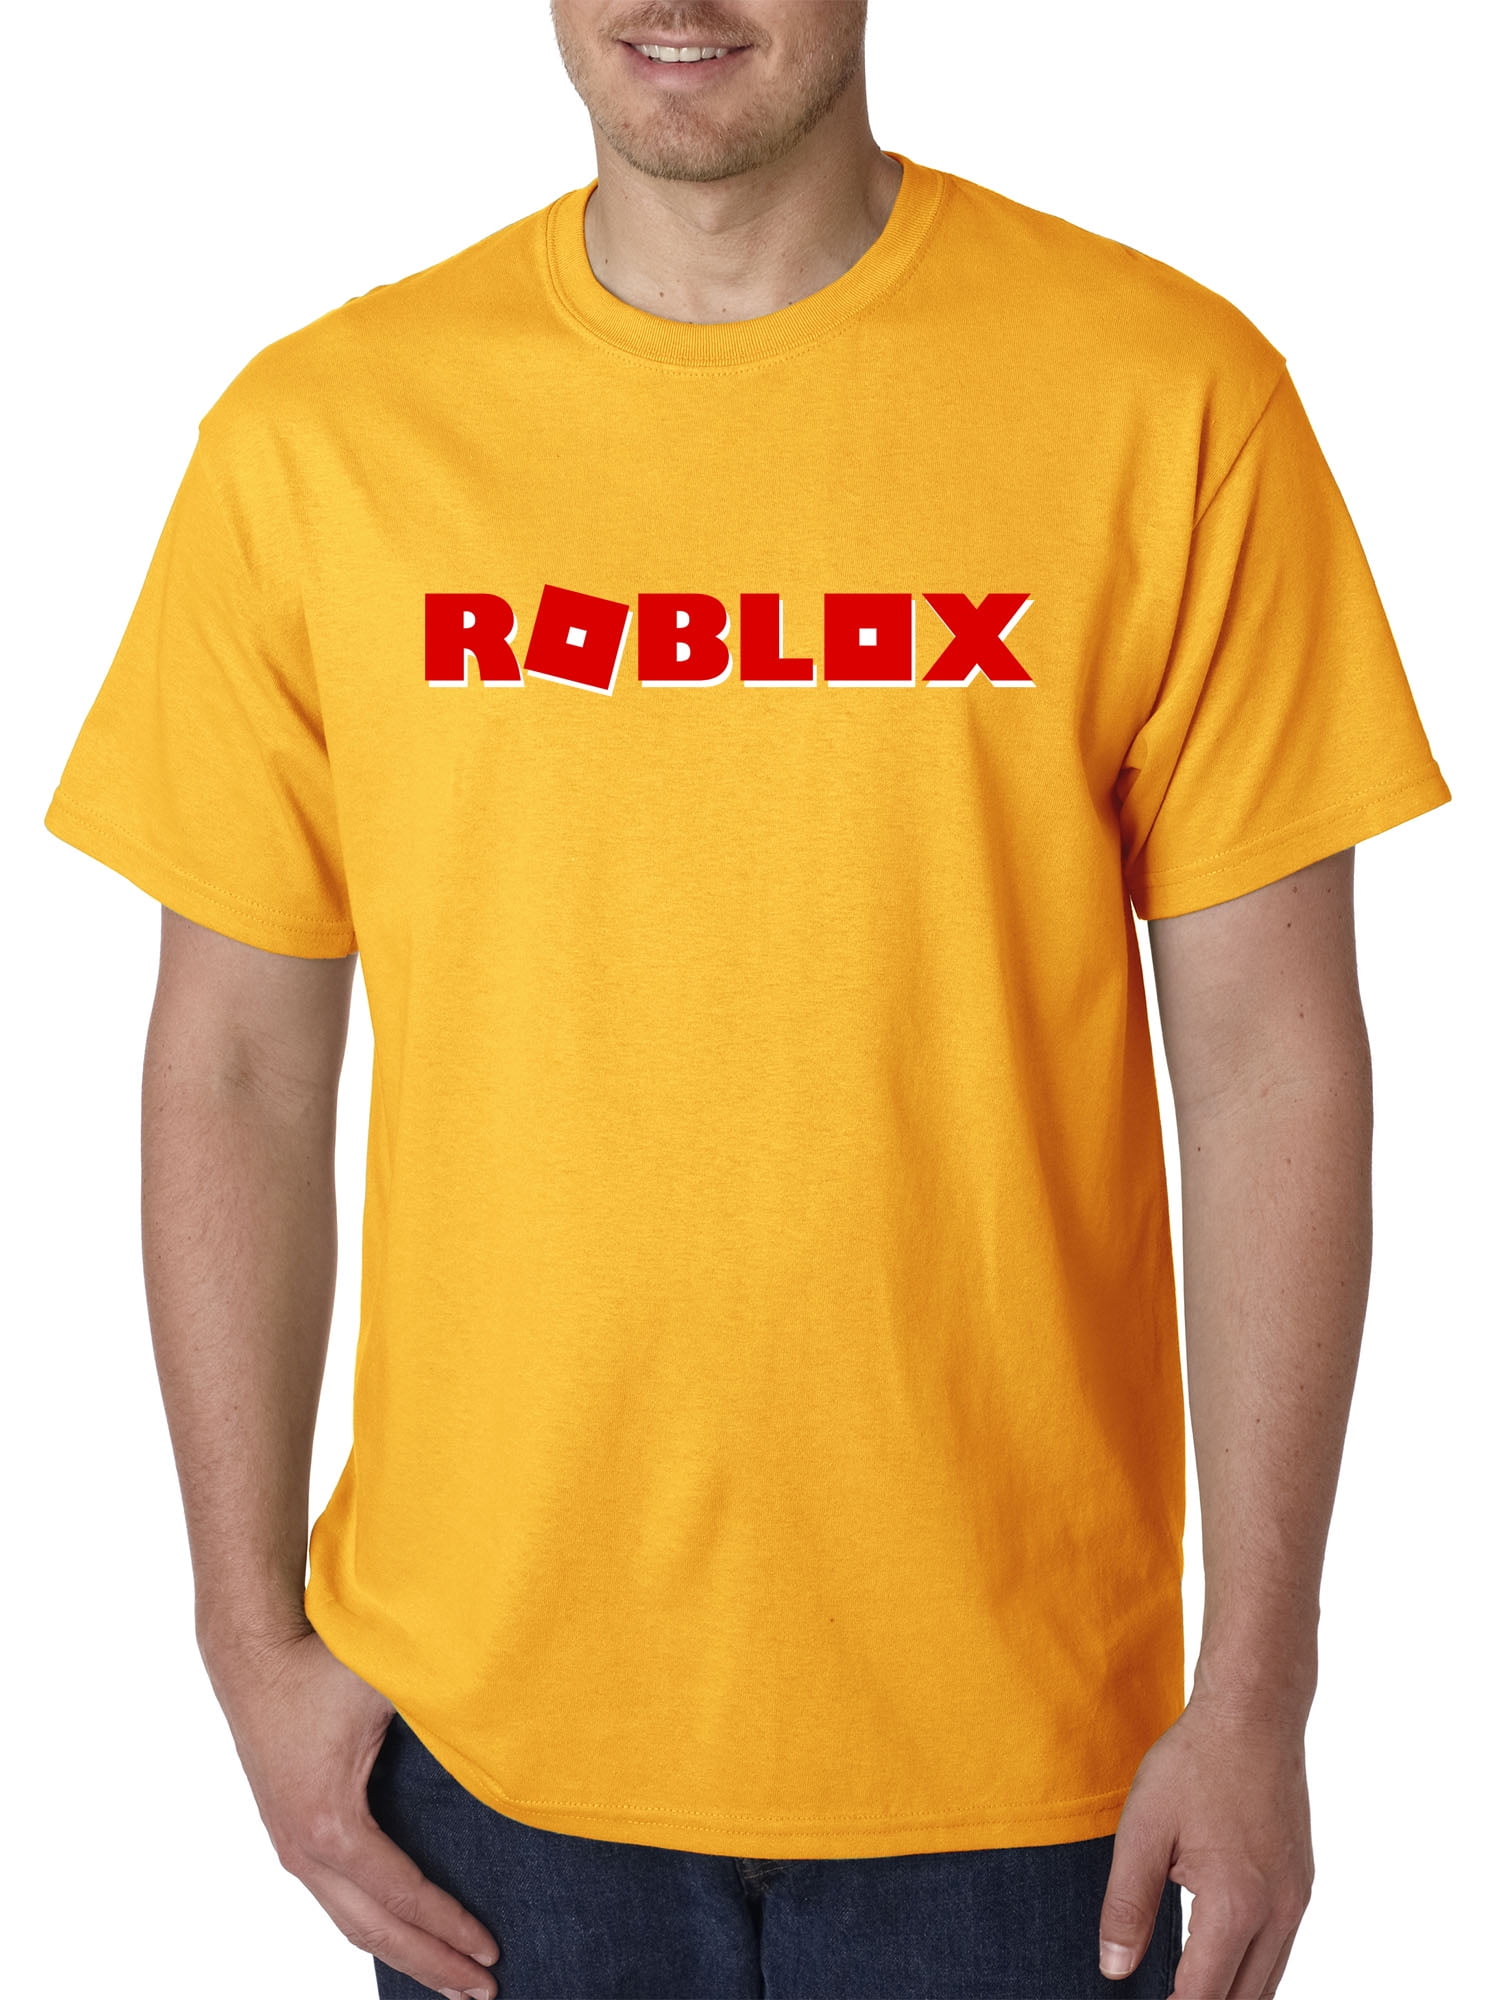 Unisex Kids Clothing Sizes 4 Up Youth T Shirt Roblox Logo Game Filled New Way 922 Clothing Shoes Accessories - roblox naked orange shirt